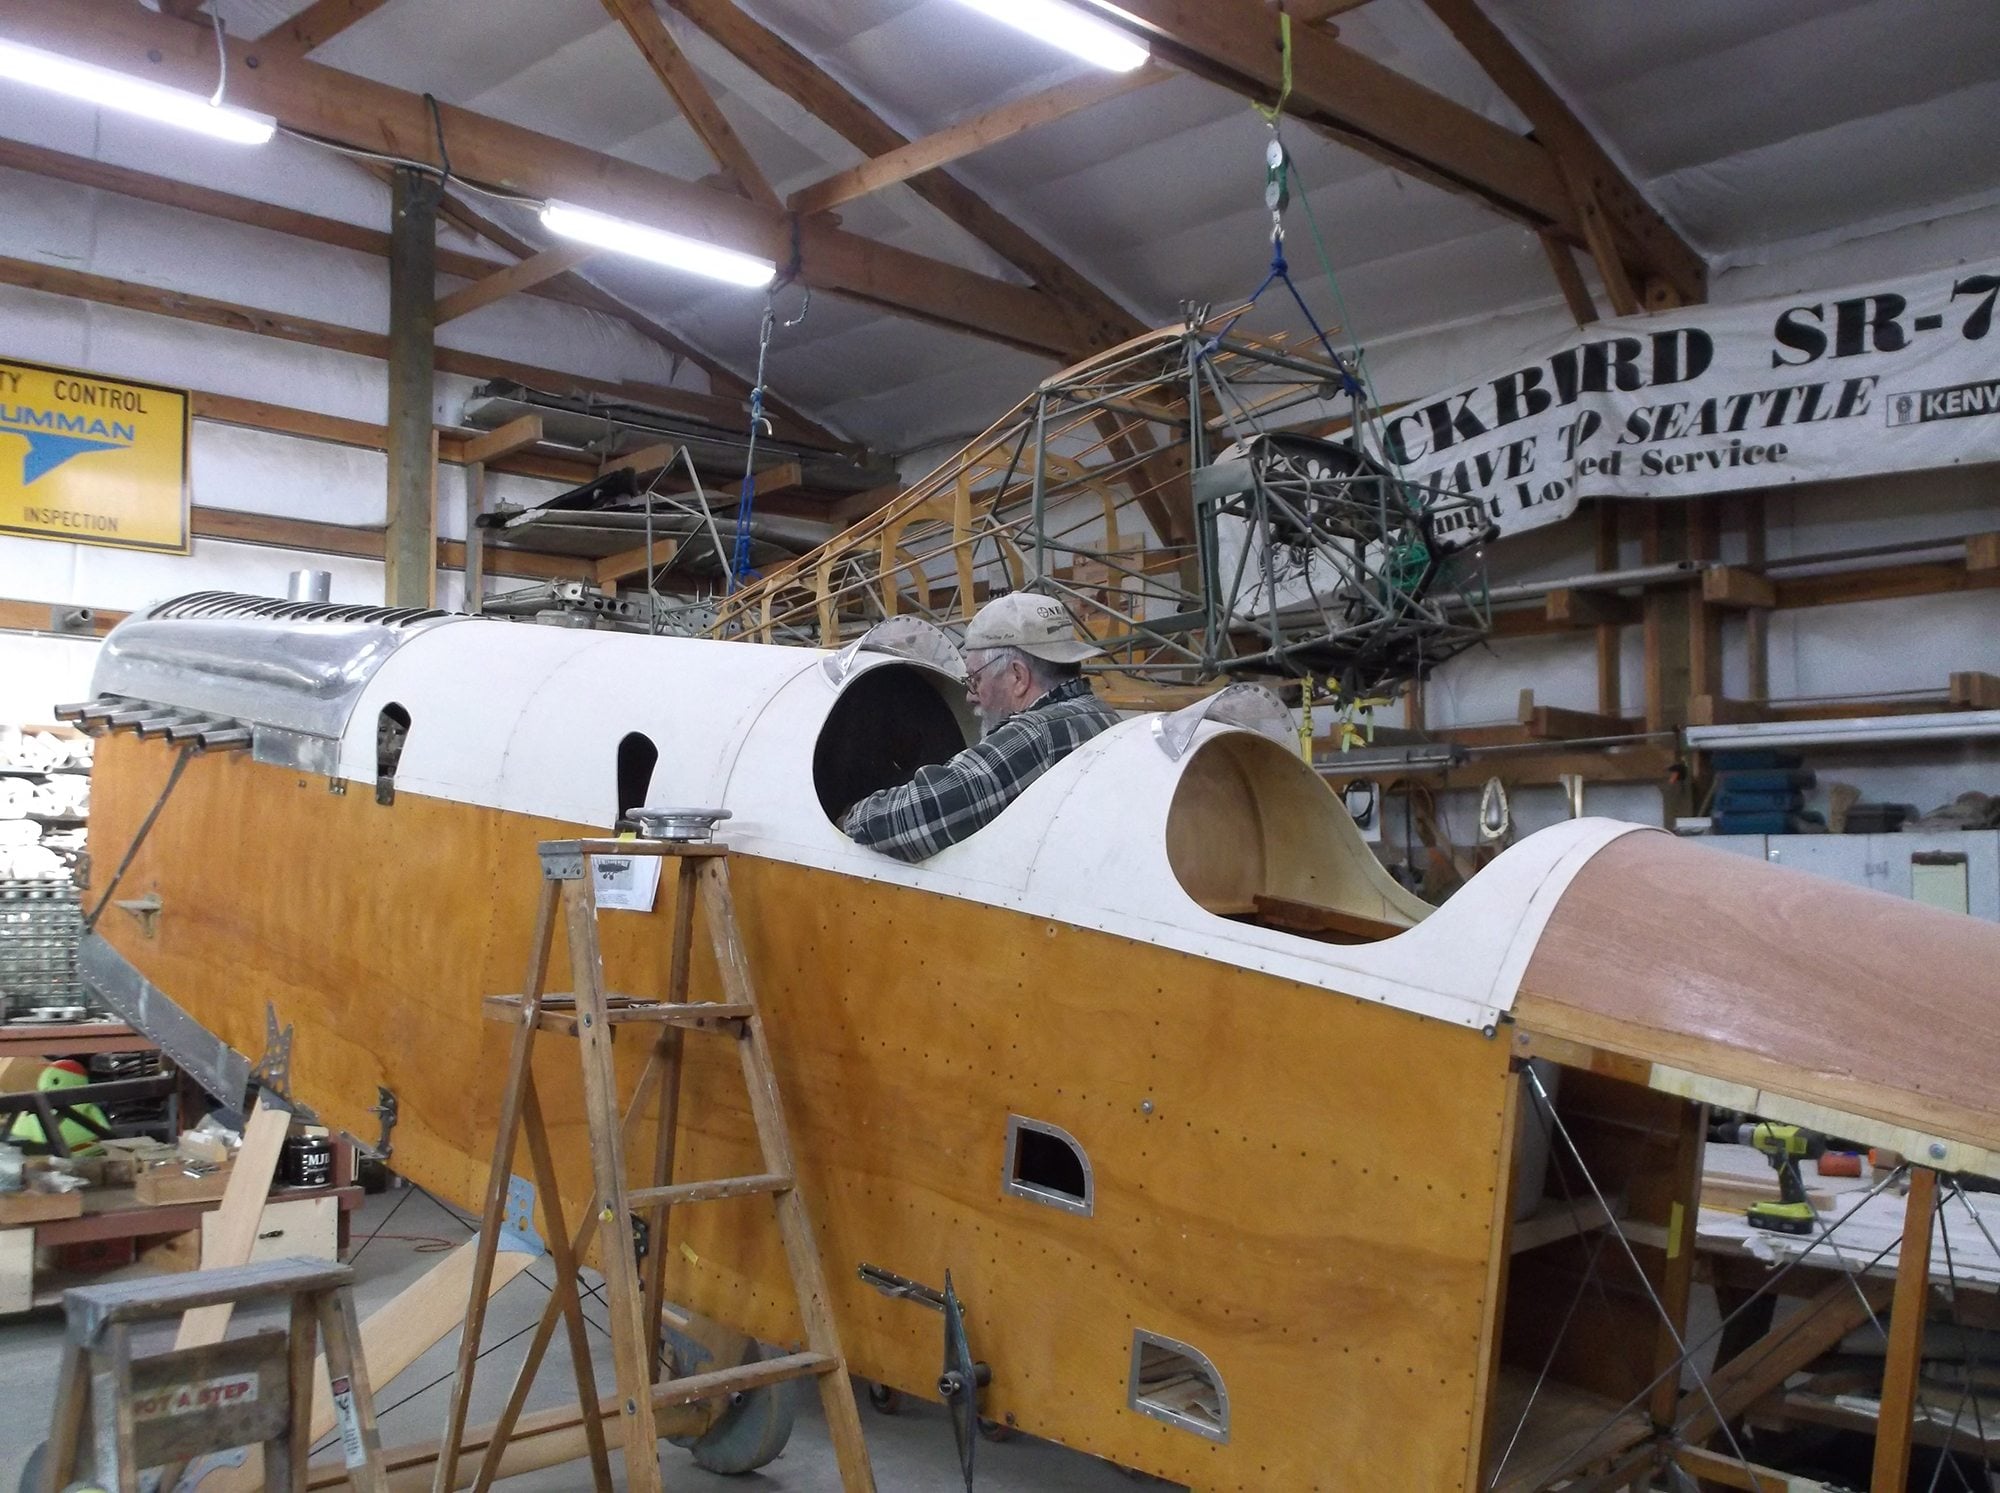 Restoration continues on the DH-4 Liberty that will be displayed at Pearson Air Museum.